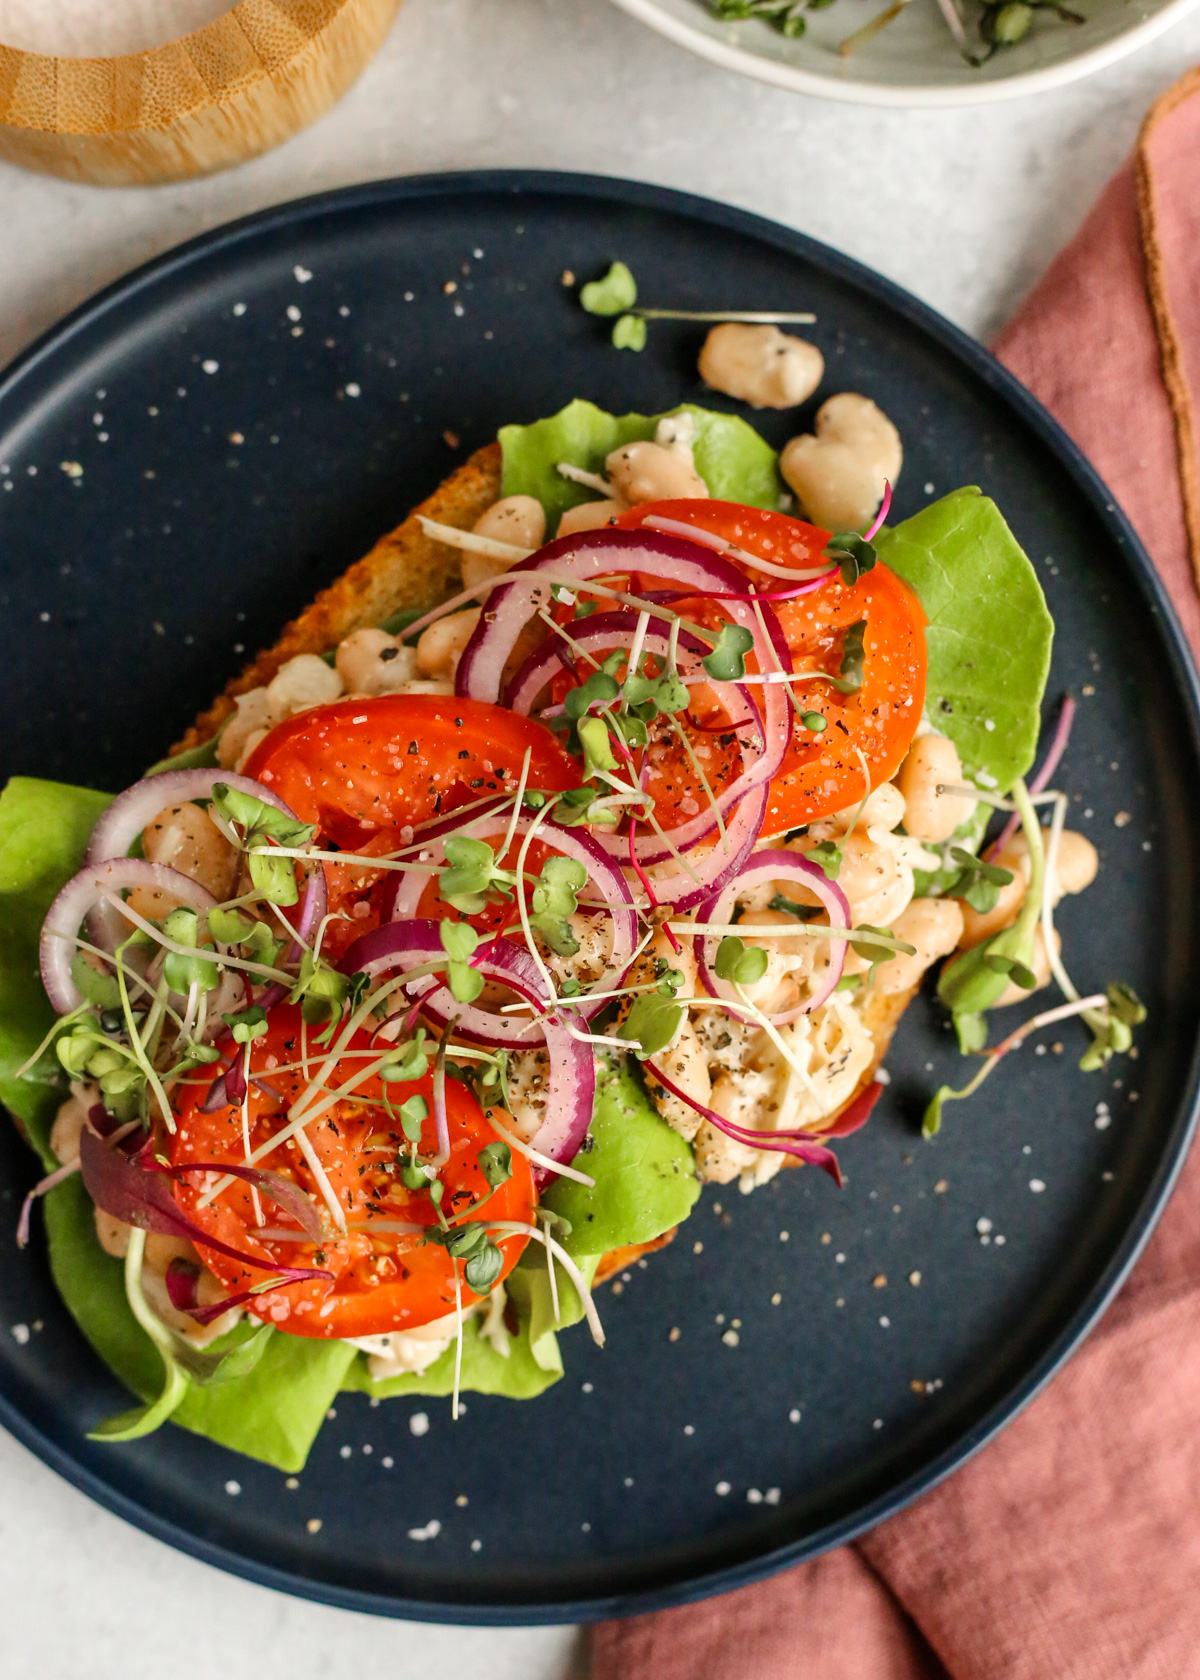 Overhead view of Caesar Beans on Toast, with sourdough bread topped with white beans coated in caesar dressing, stacked with fresh lettuce, sliced tomatoes and red onions, micro greens, and black pepper for garnish